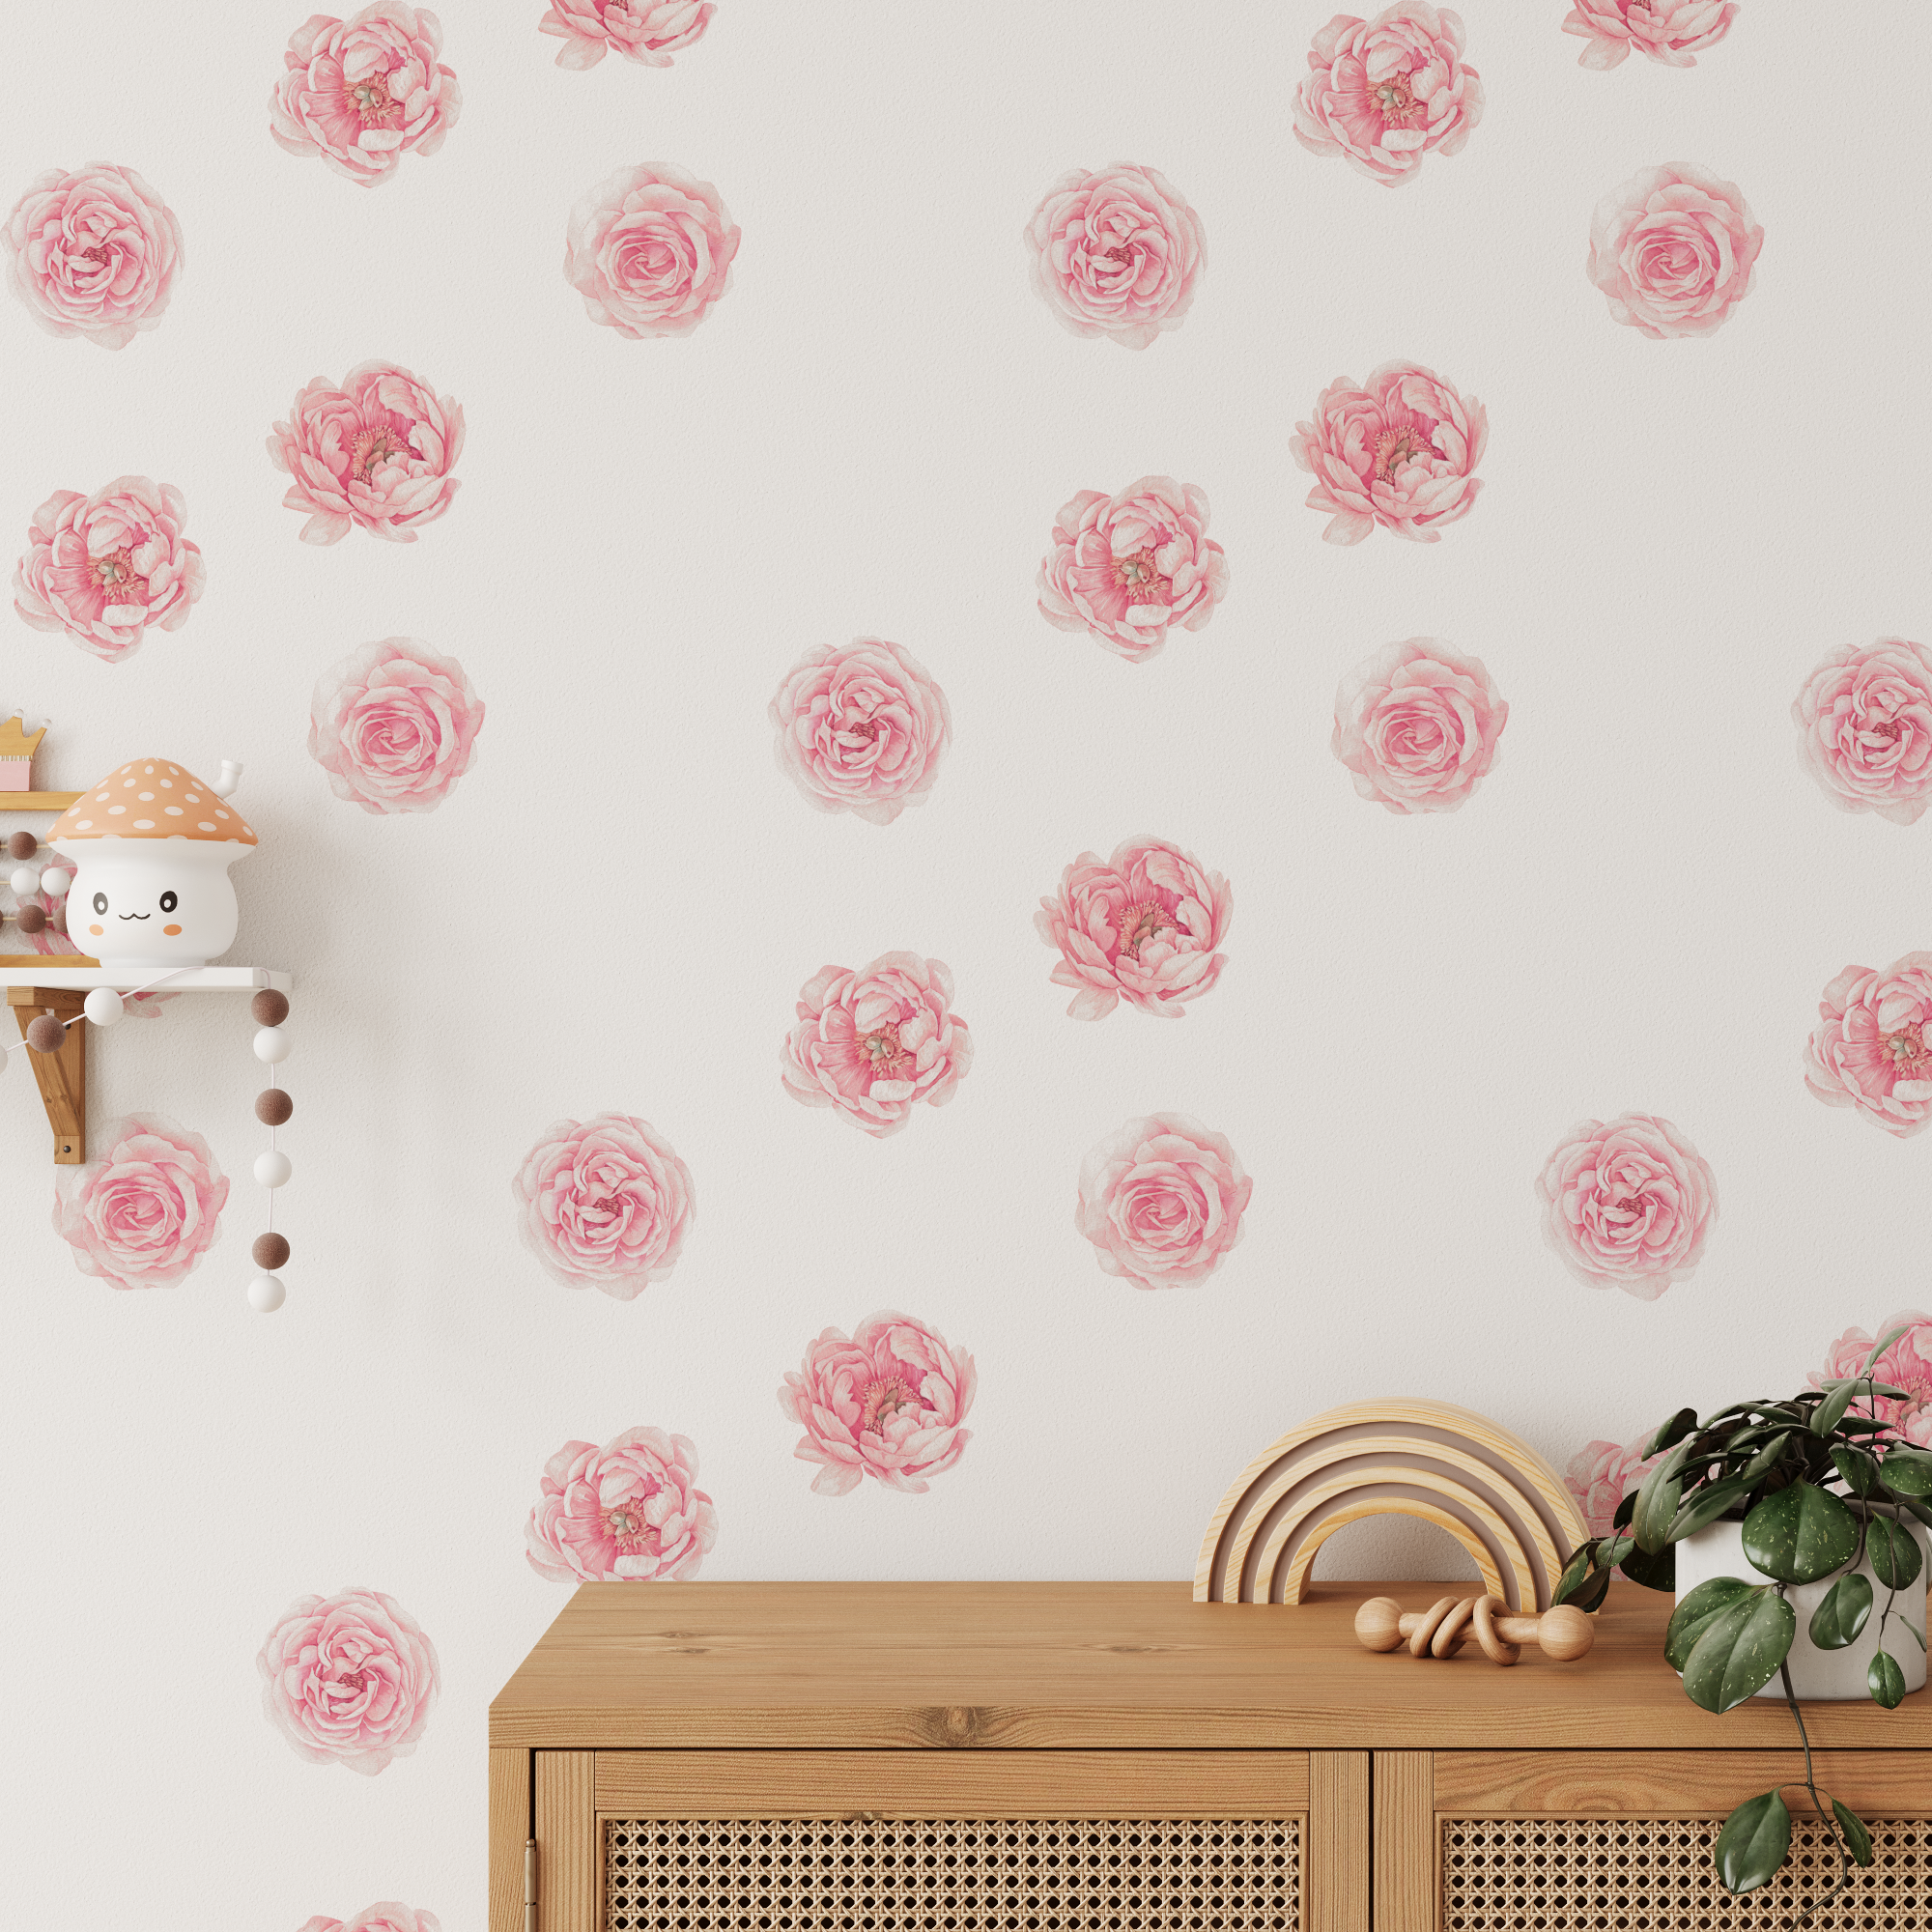 Mini Peony Rose Floral Wall Decals